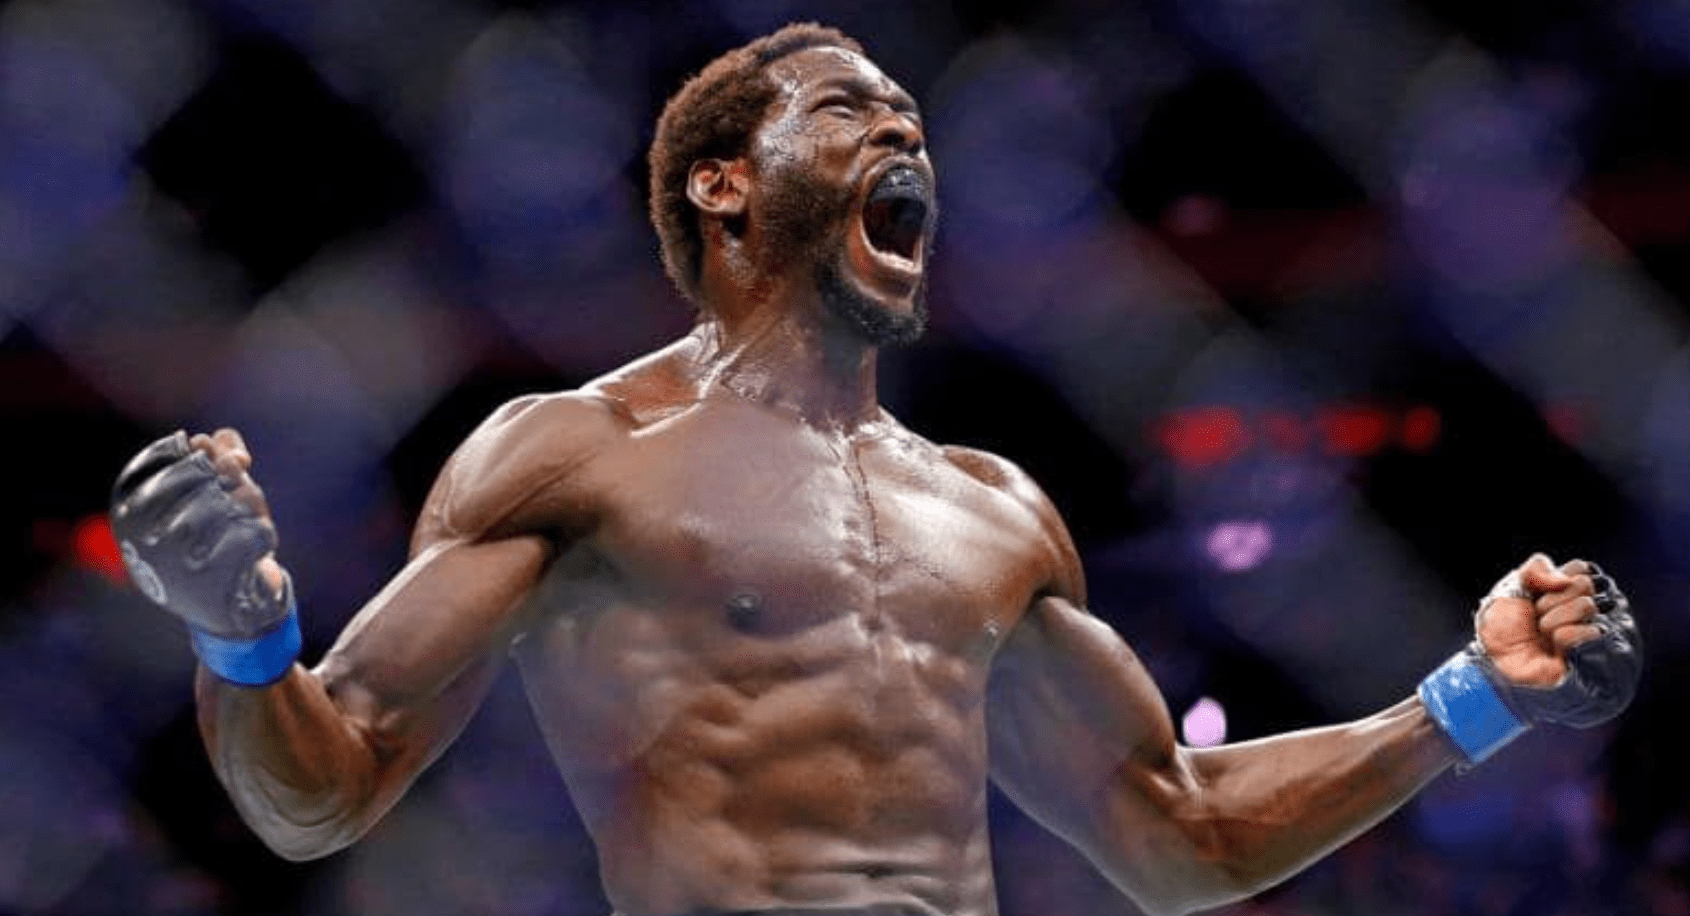 UFC: Jared Cannonier Wants To Fight Robert Whittaker Next